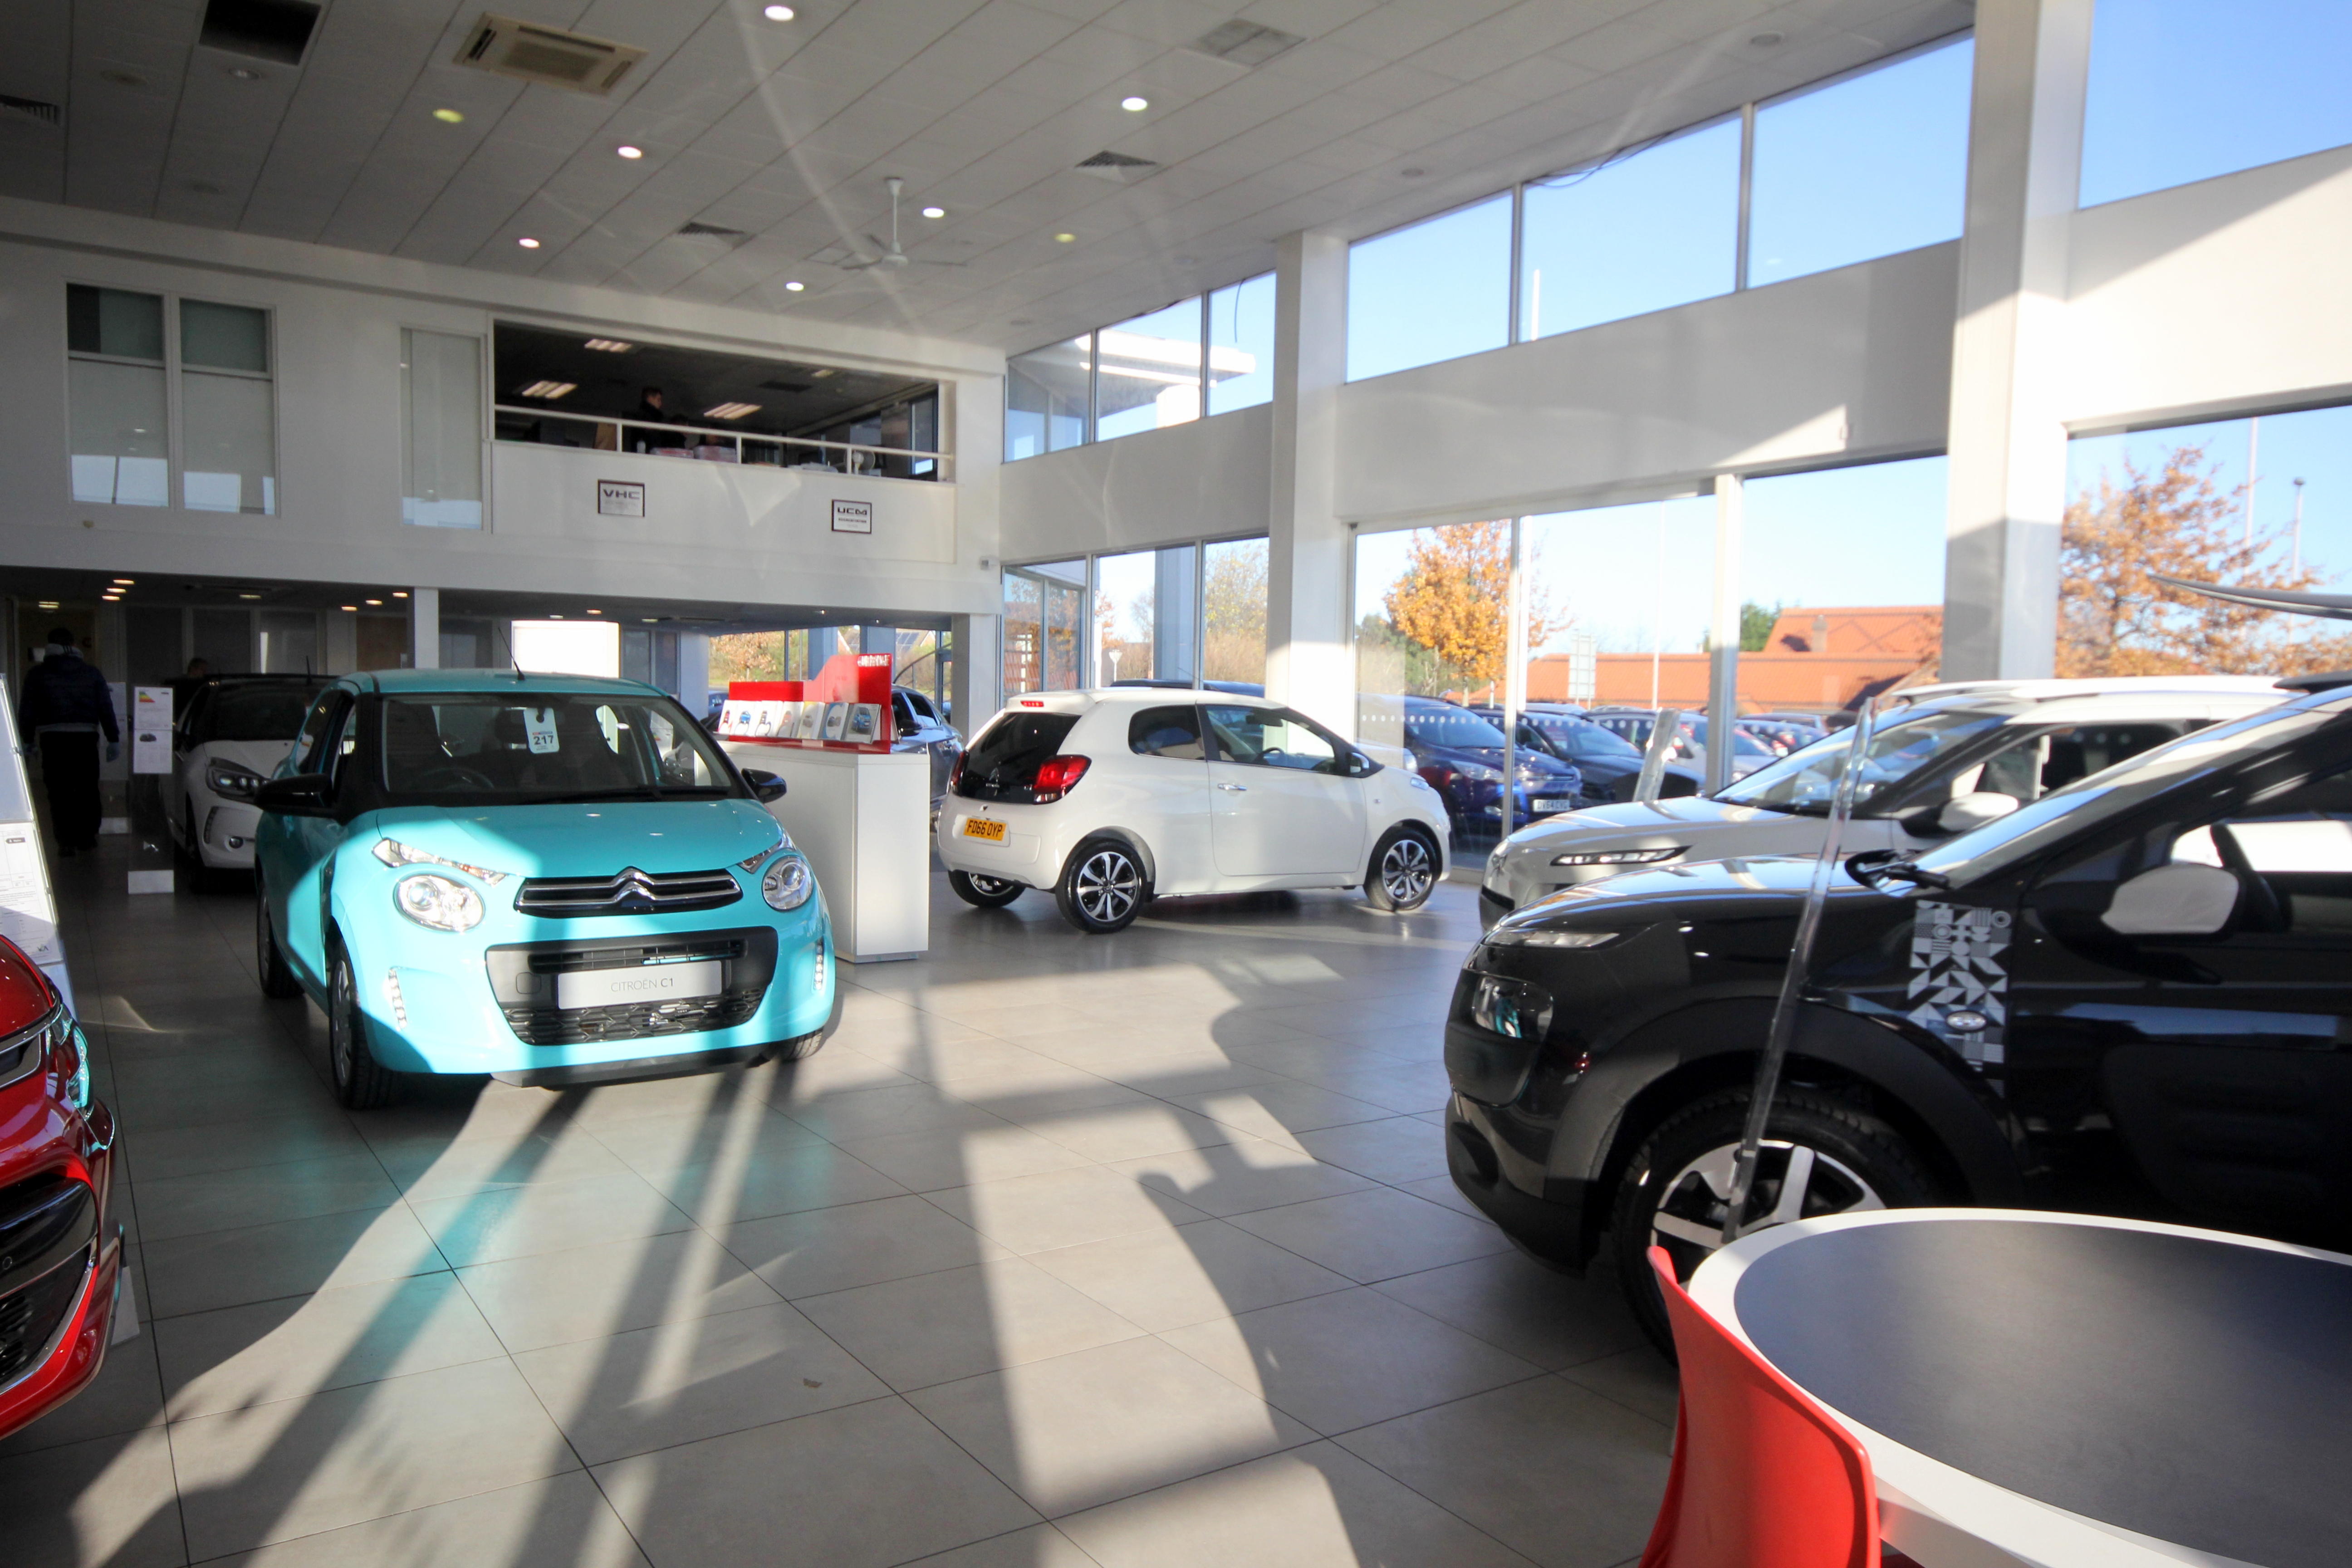 In the showroom at the Citroen Mansfield dealership Evans Halshaw Citroen Mansfield Mansfield 01623 789789